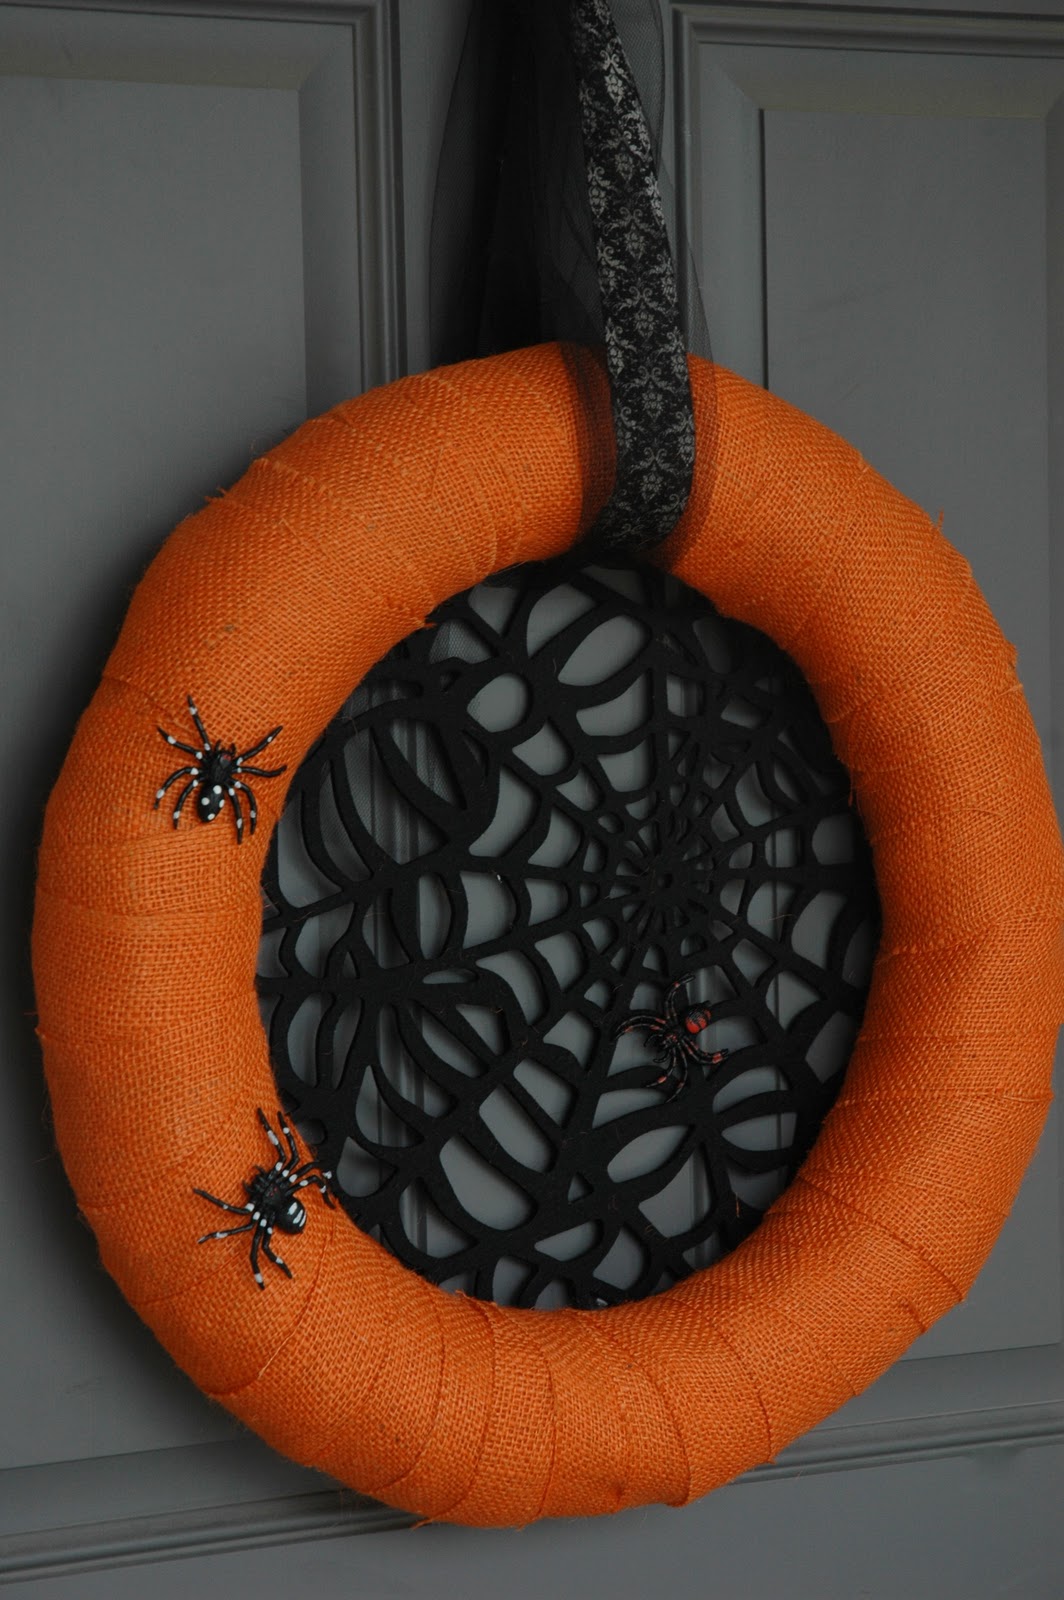 20 Creepy DIY Halloween Wreath Designs That Will Send Shivers Down Your Spine